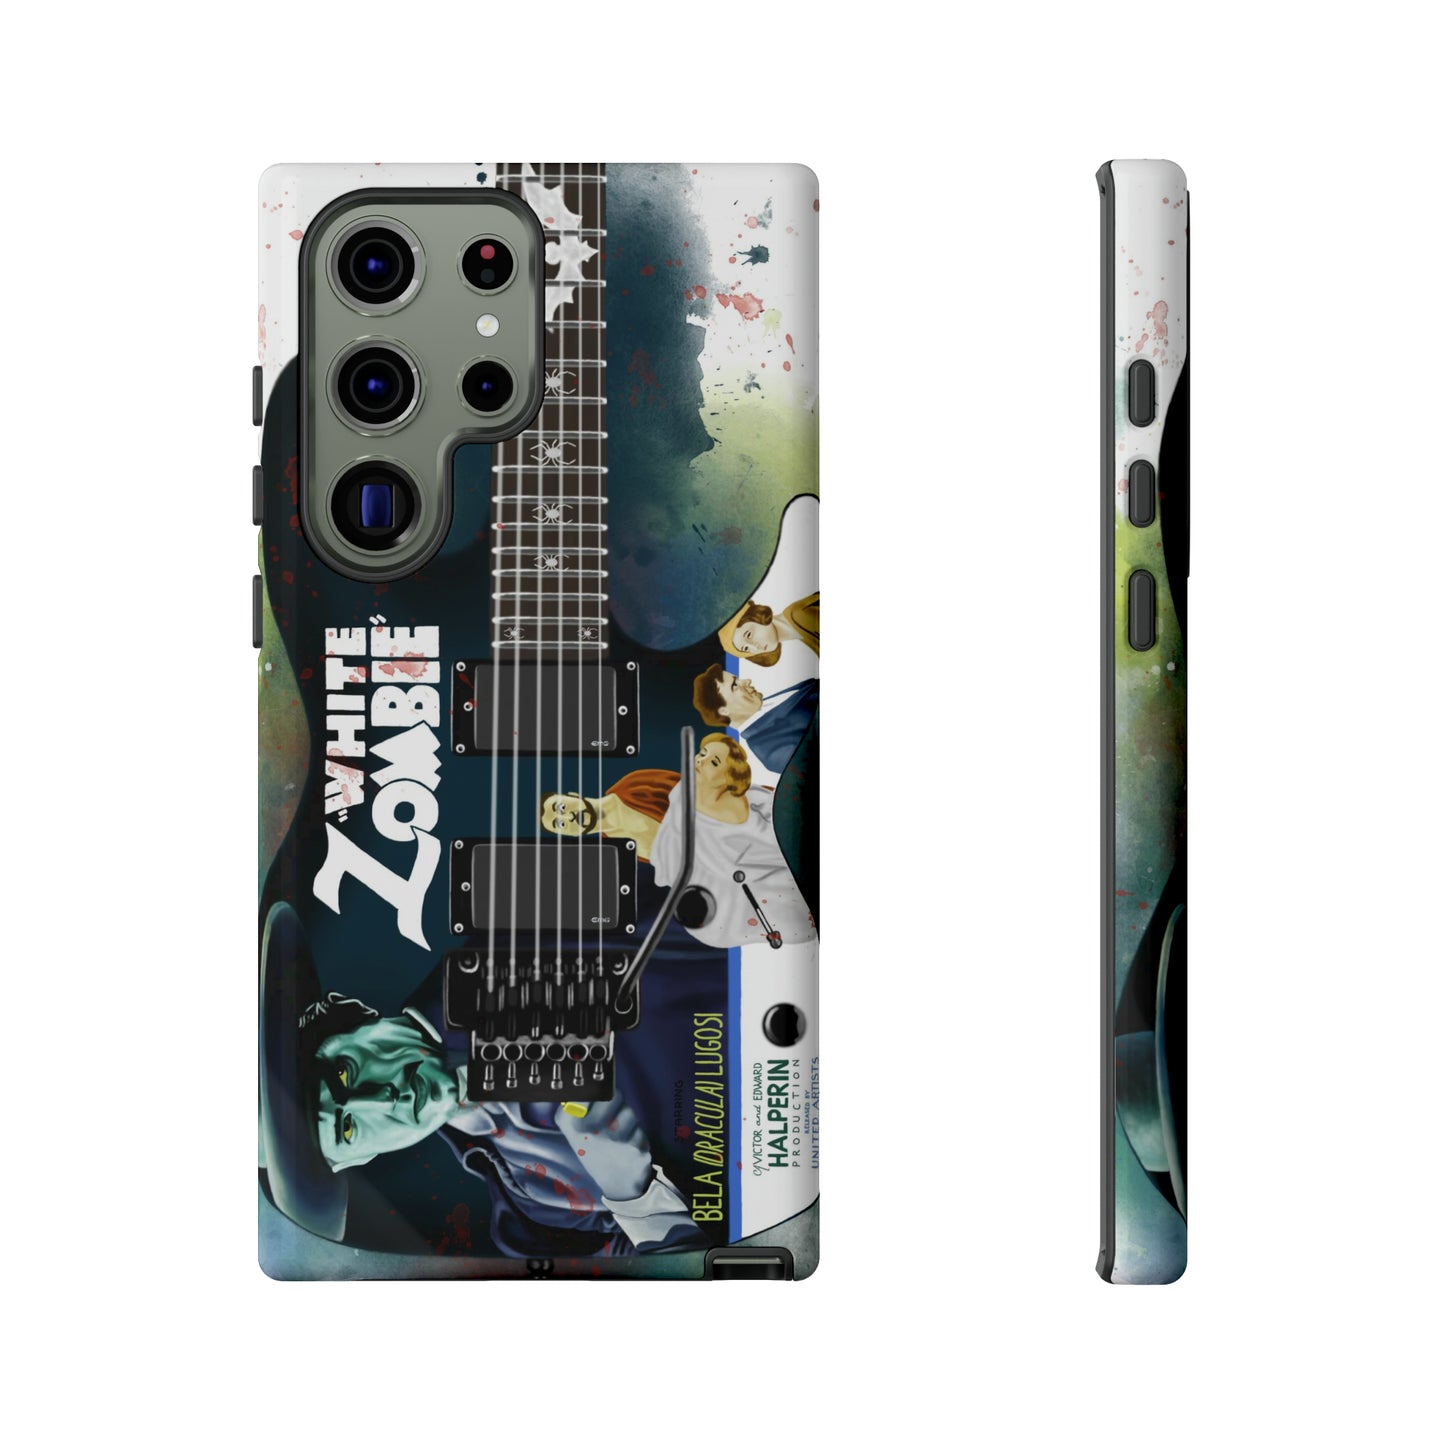 Digital painting of a blue electric guitar with a vintage movie poster on it printed on samsung phone case